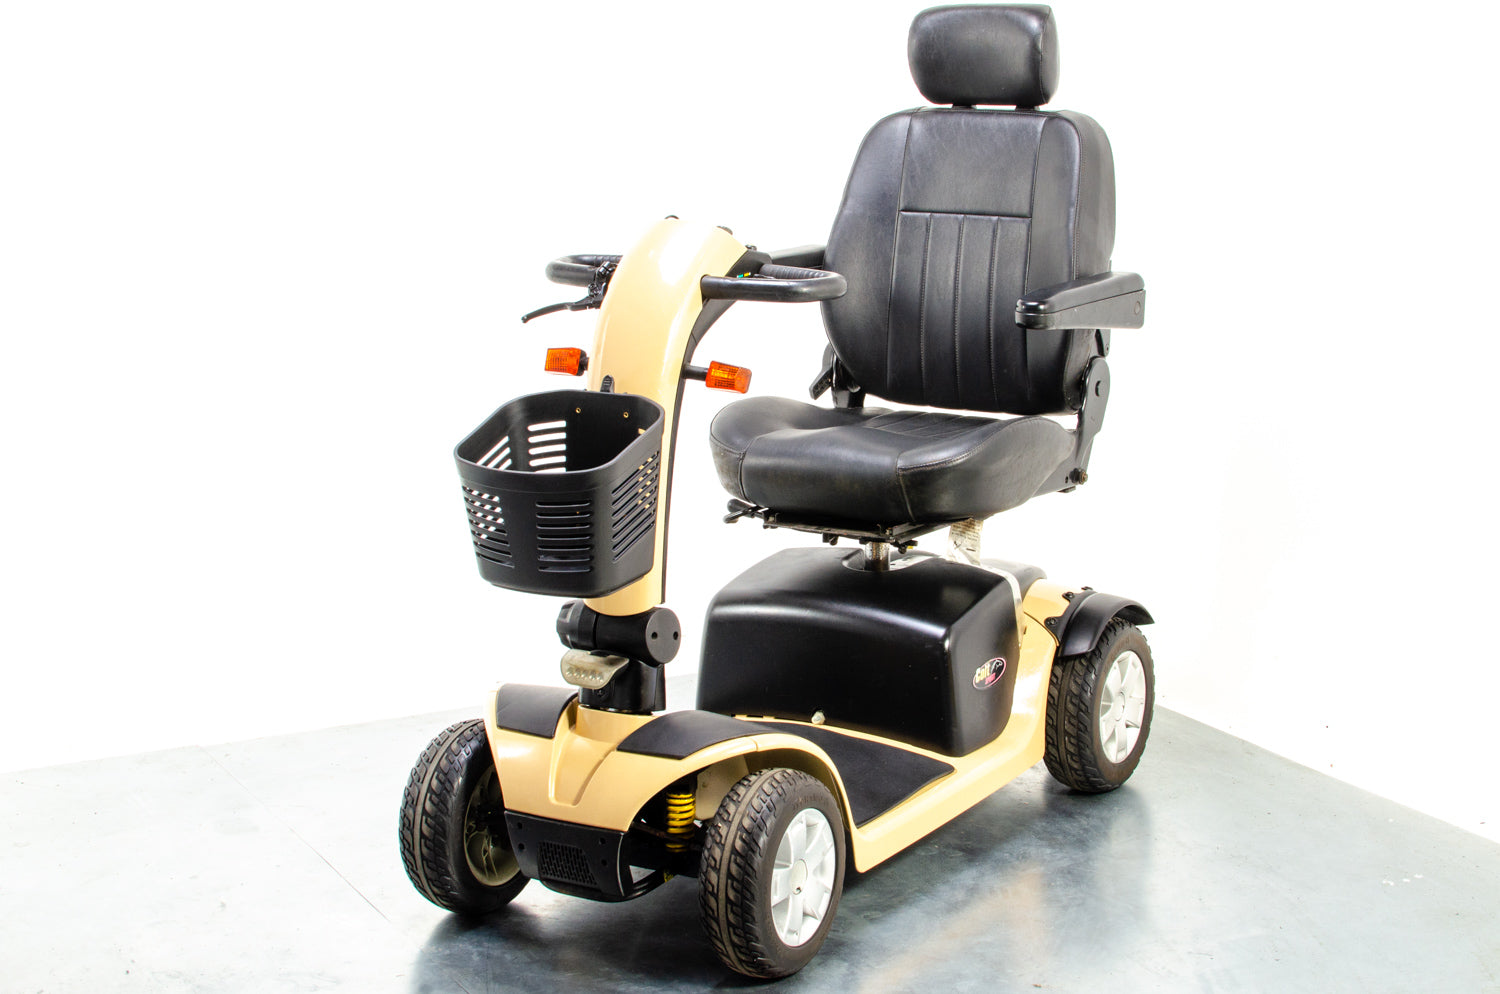 Pride Colt Sport Used Electric Mobility Scooter 8mph Transportable Suspension Road Pavement Beige Sparkle